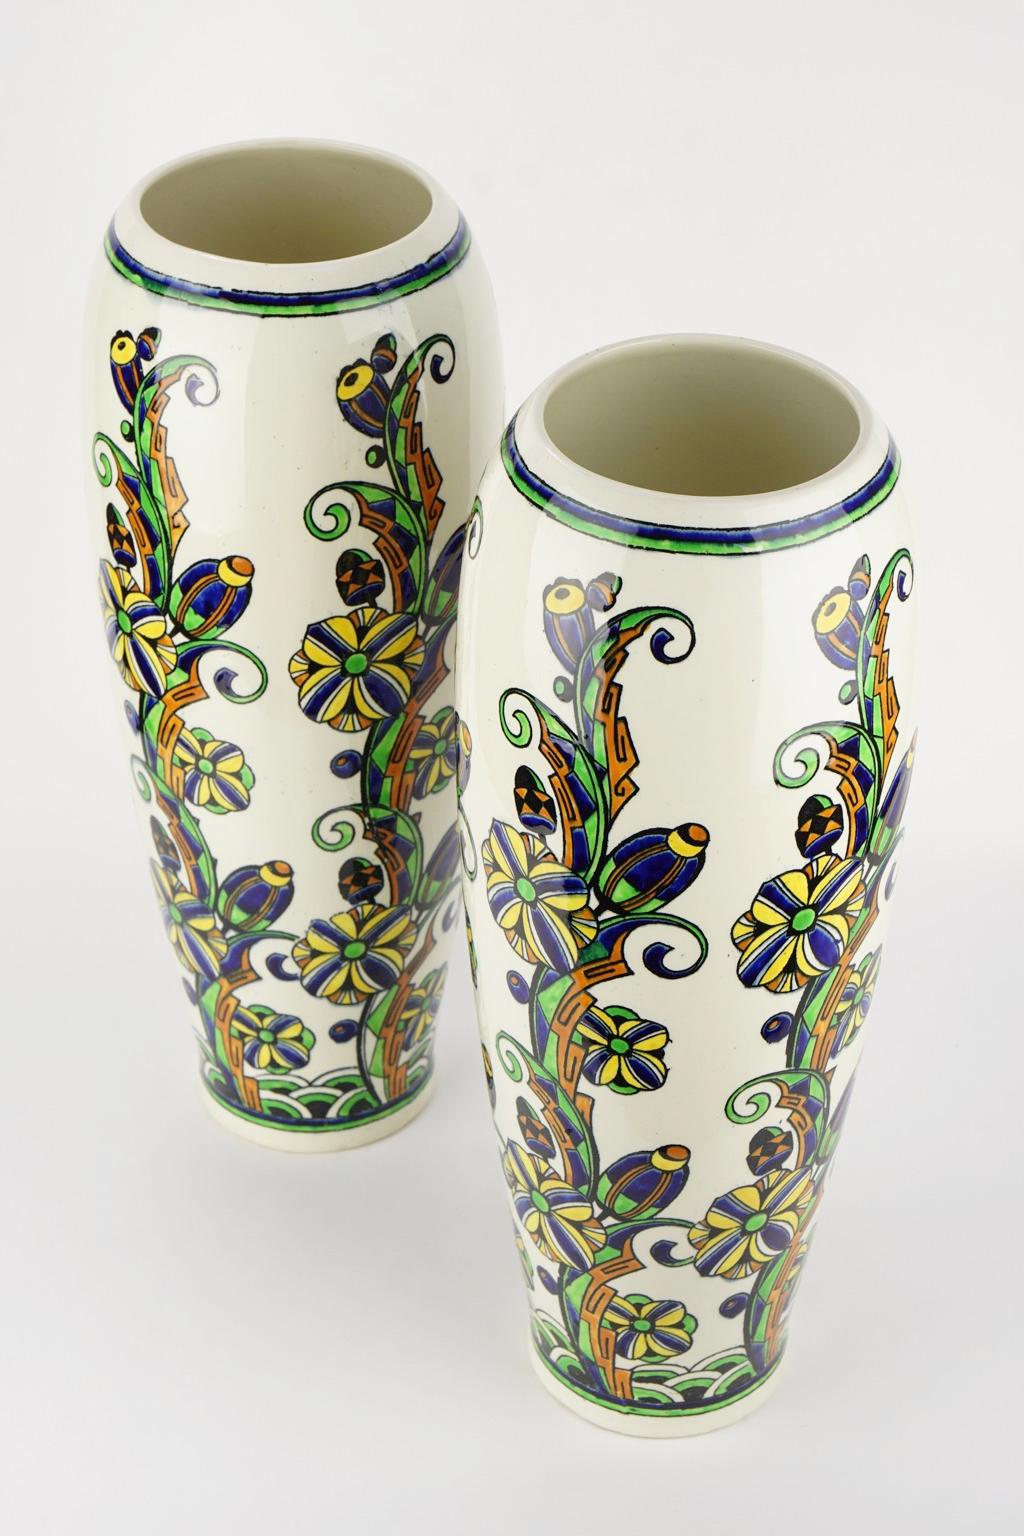 Pair of large Art Deco floral vases.
Material: Enamel on earthenware.
Size: Height 44 cm., diameter base 10 cm., diameter top 12 cm.
Very good condition.